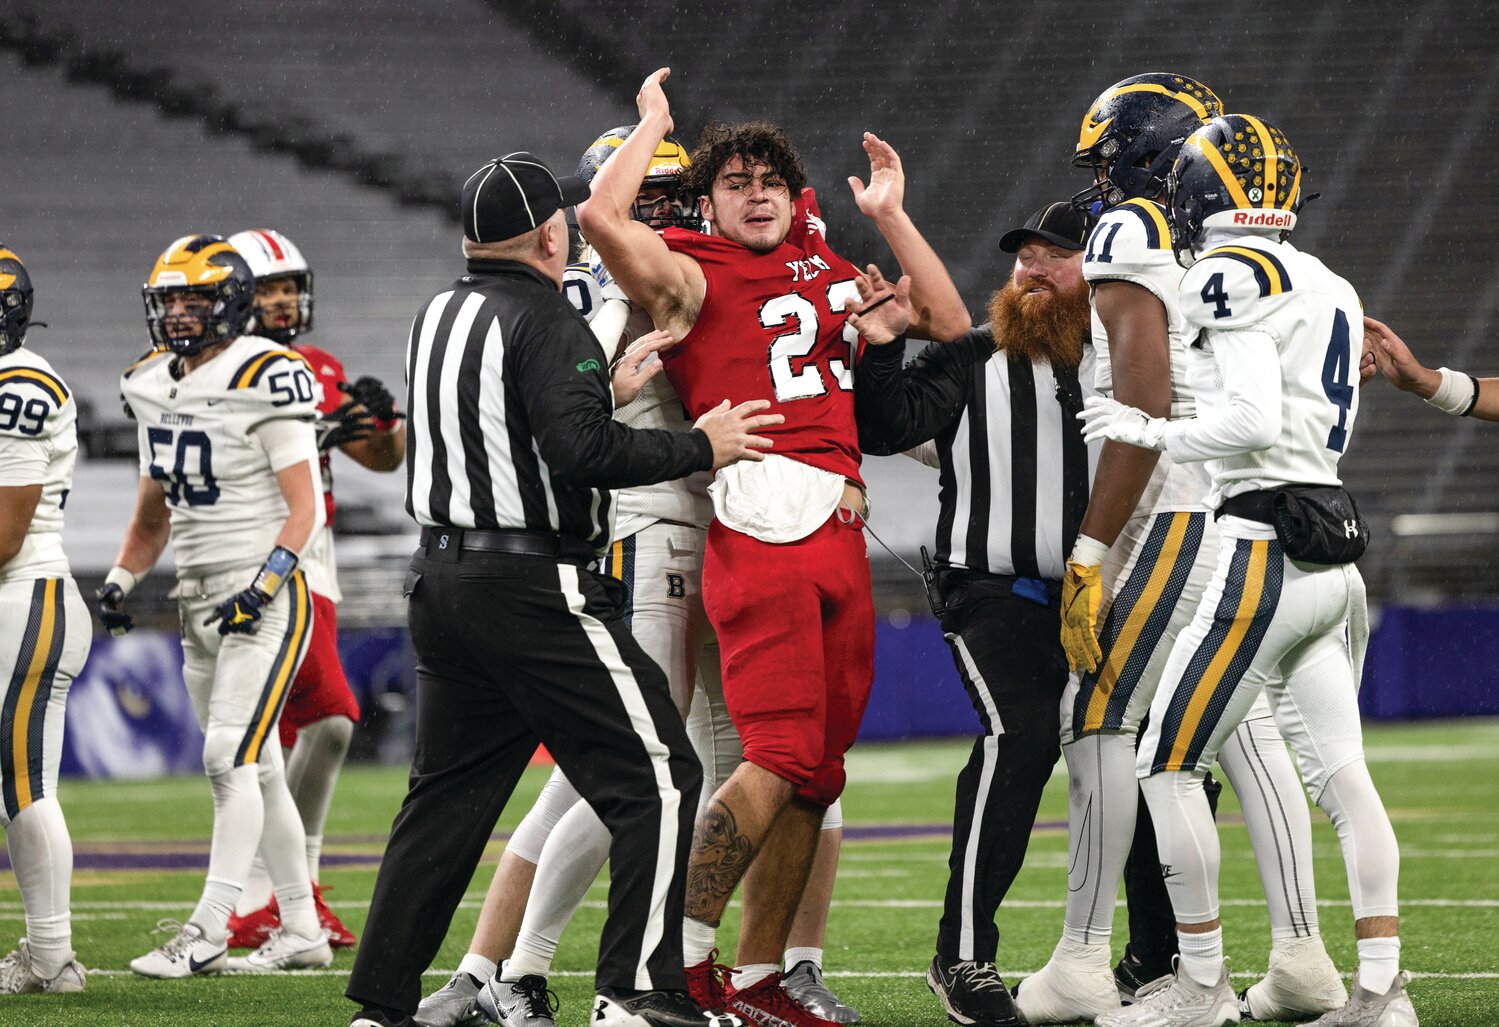 Yelm running back Brayden Platt is ejected from the 3A state championship game after an altercation with Bellevue players at Husky Stadium on Friday, Dec. 1.